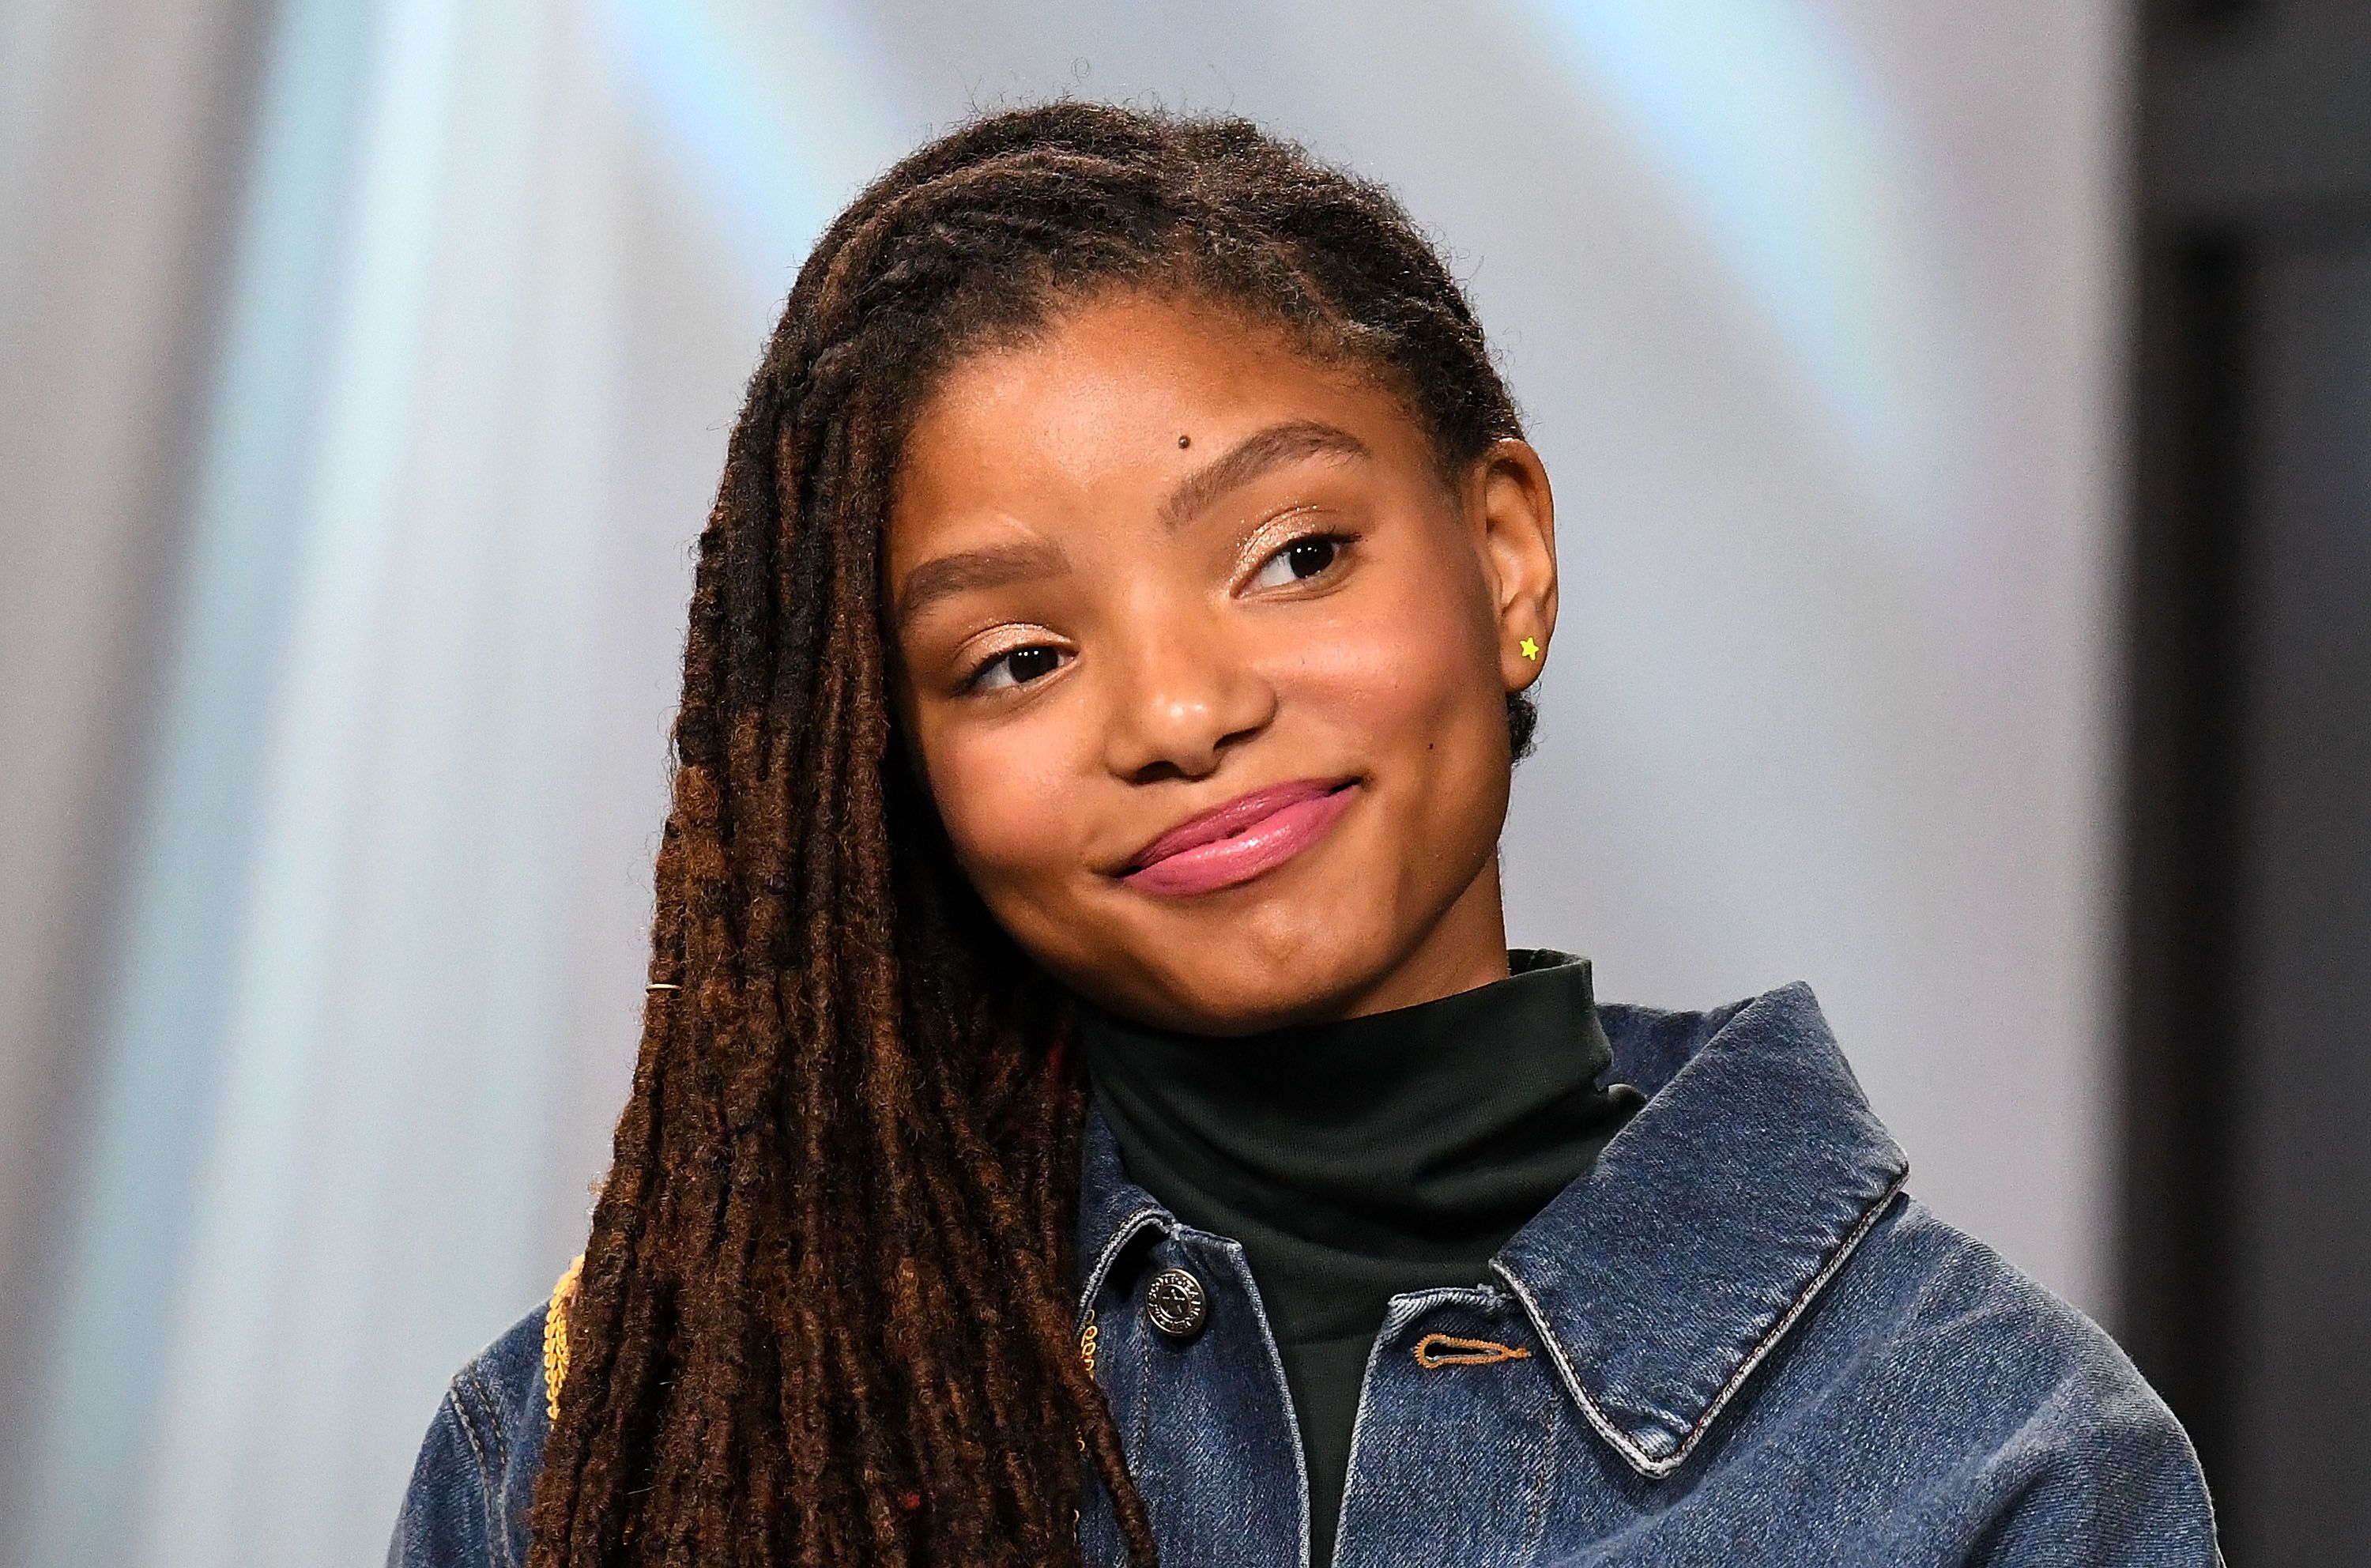 halle-bailey-of-r-b-duo-chloe-x-halle-visits-build-to-news-photo-875526188-1562600090.jpg